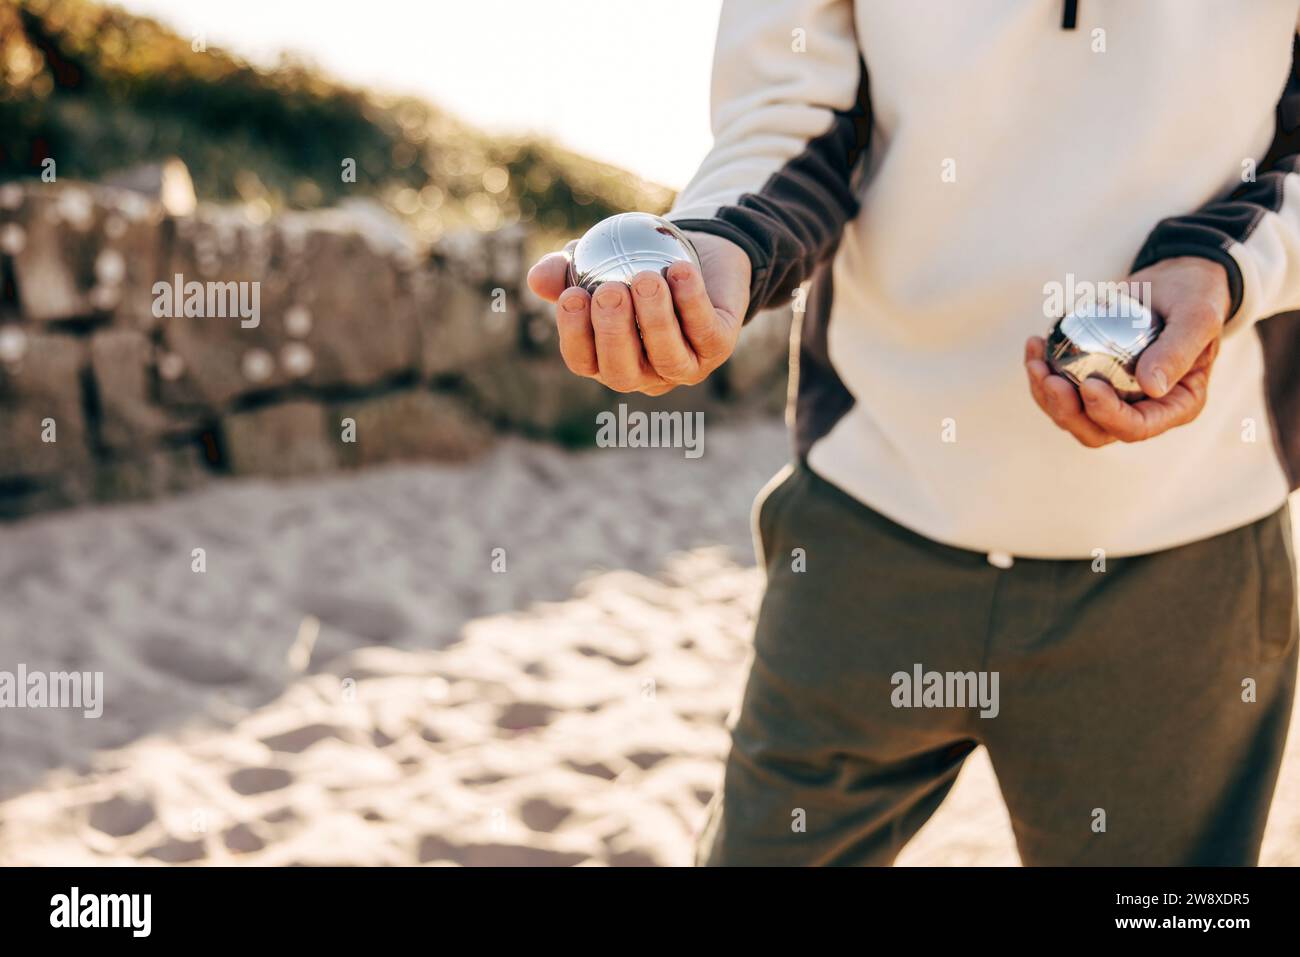 Midsection of senior man holding Petanque balls in hand Stock Photo